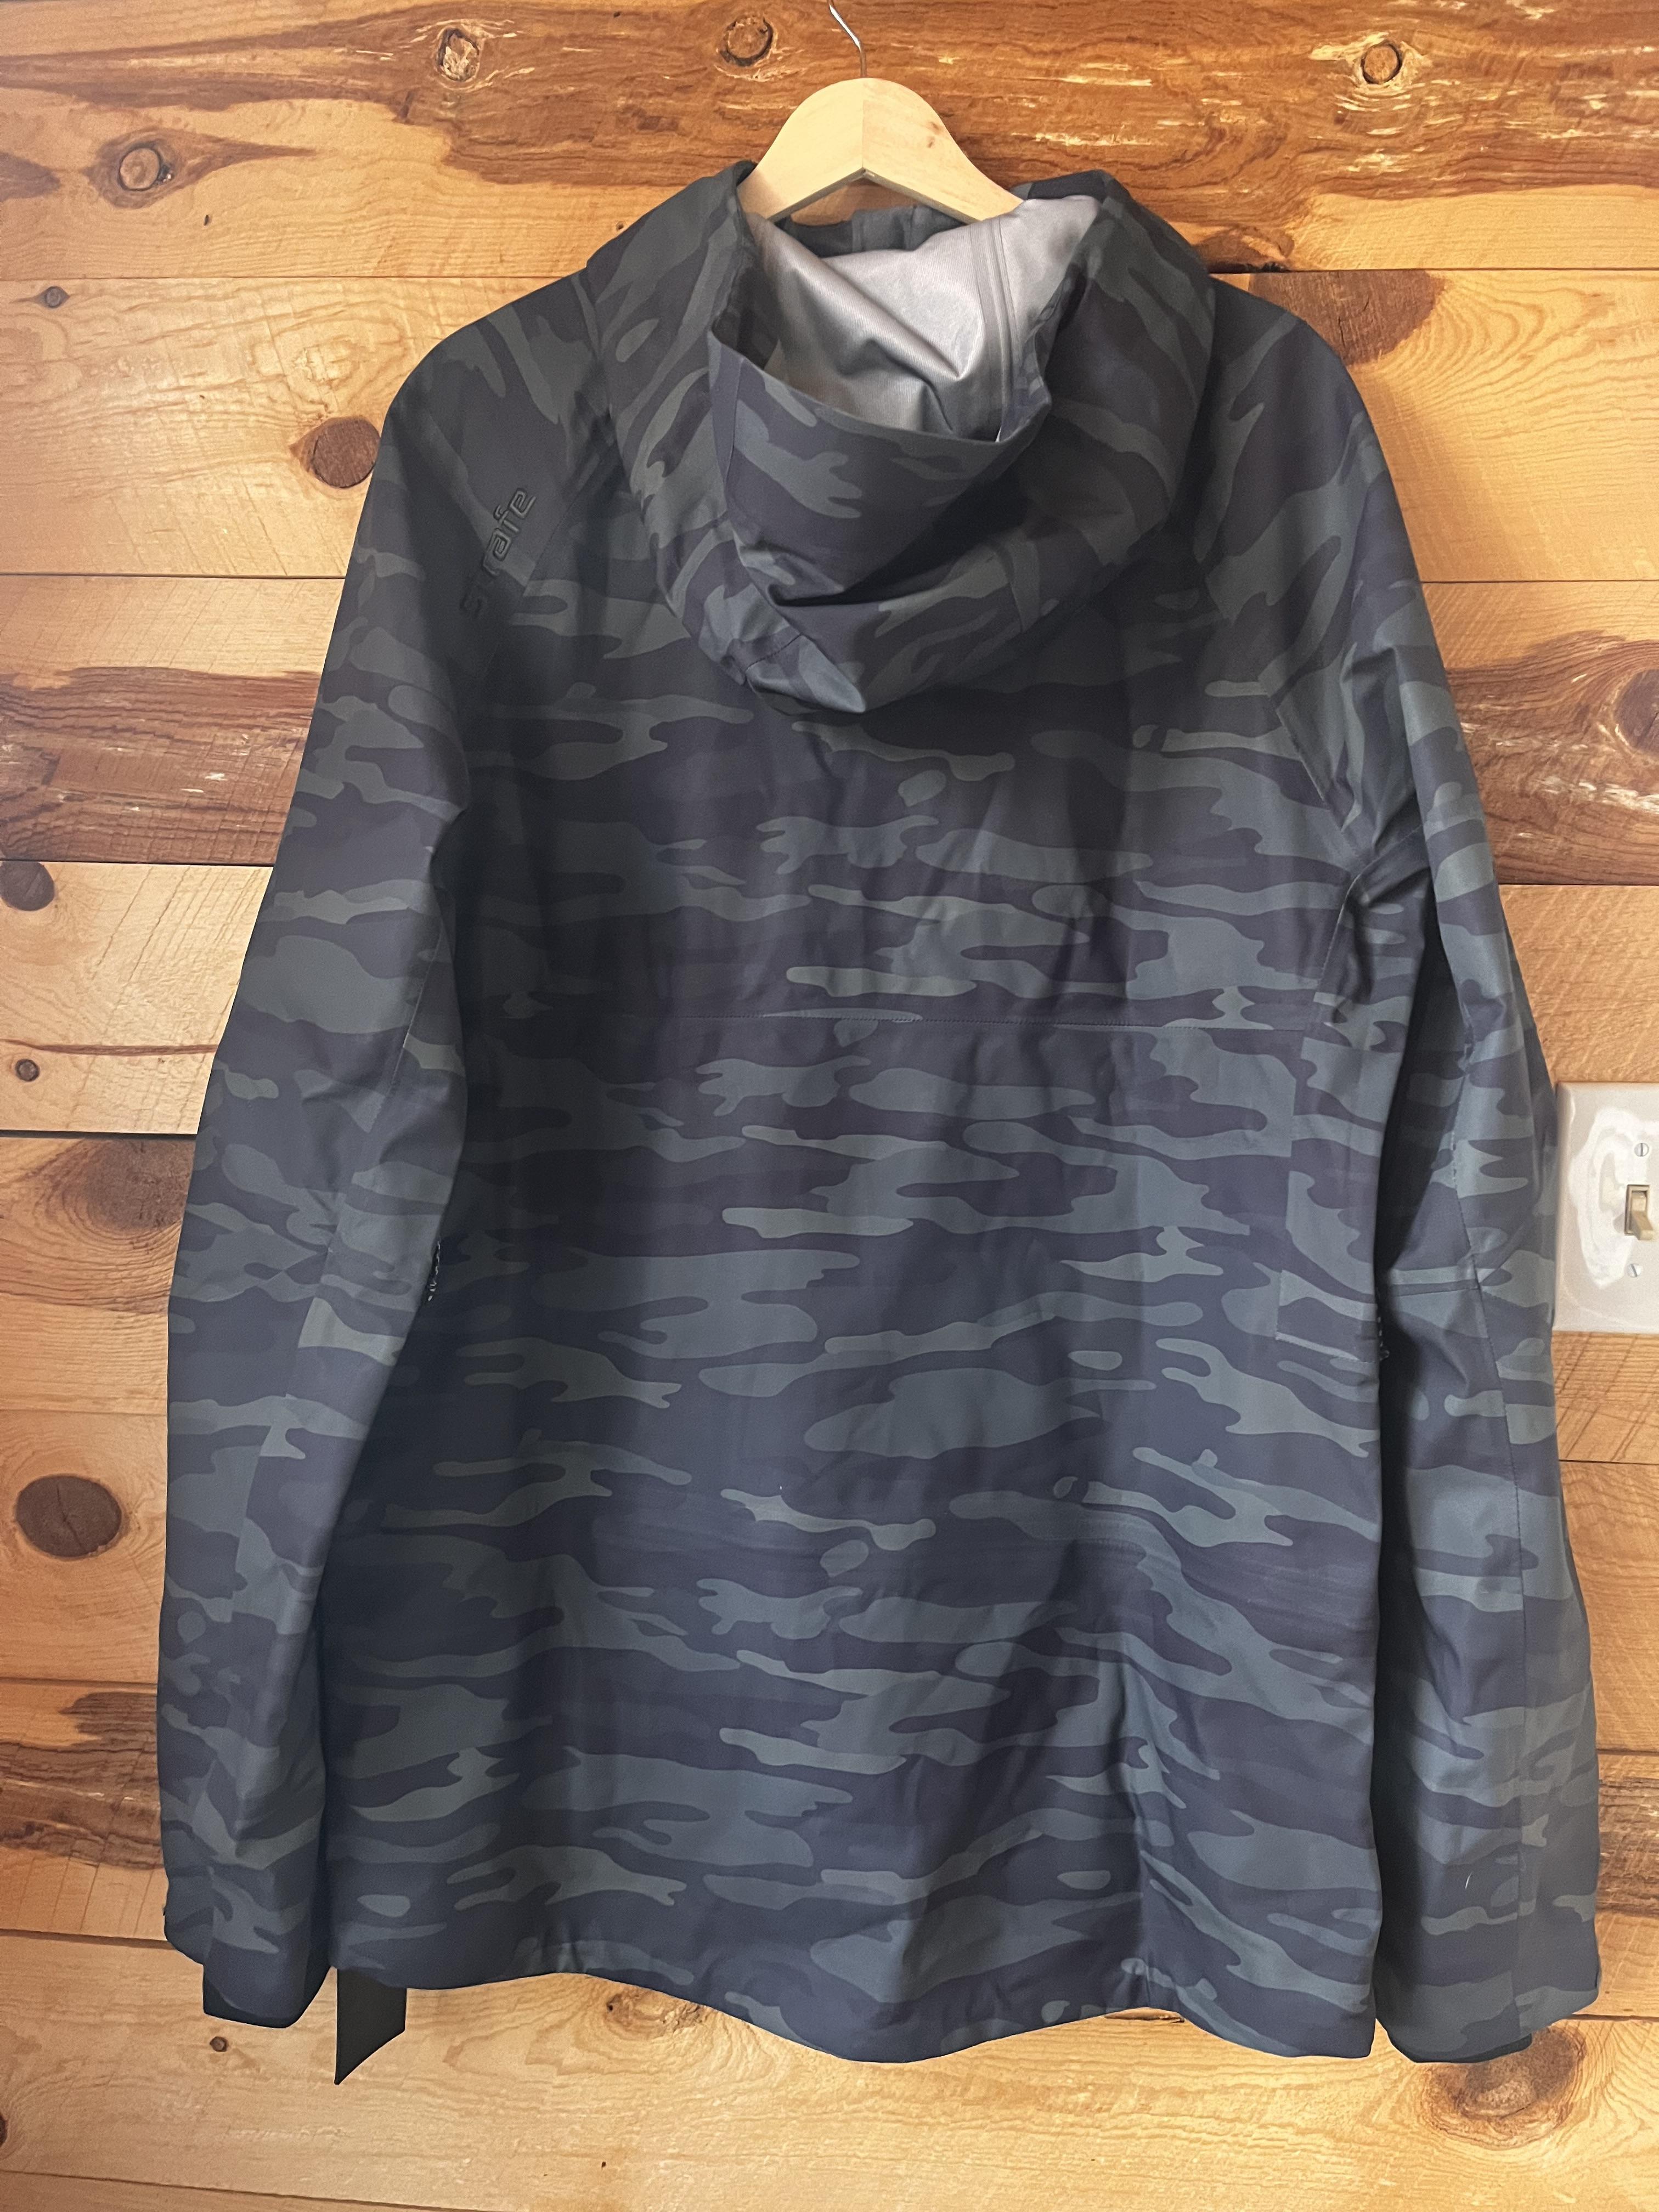 Strafe Nomad Jacket Medium 3L eVent Woods Camo. New With Tags.